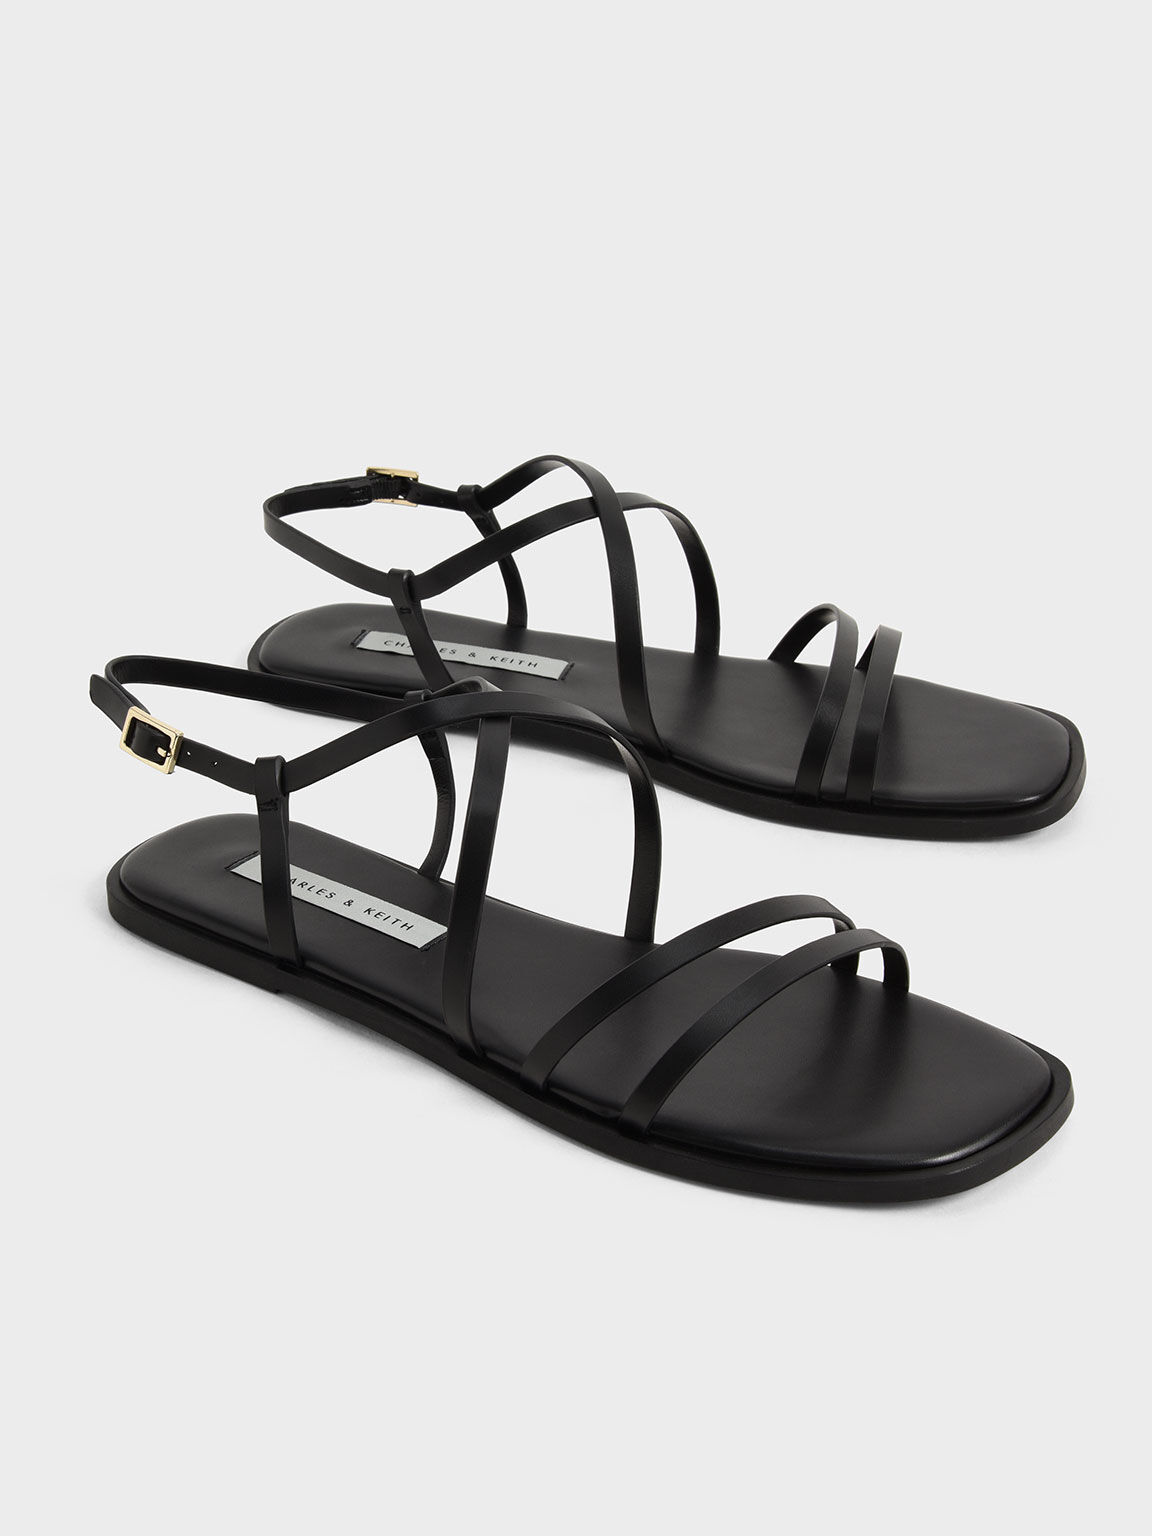 Black Strappy Flat Sandals - CHARLES & KEITH US